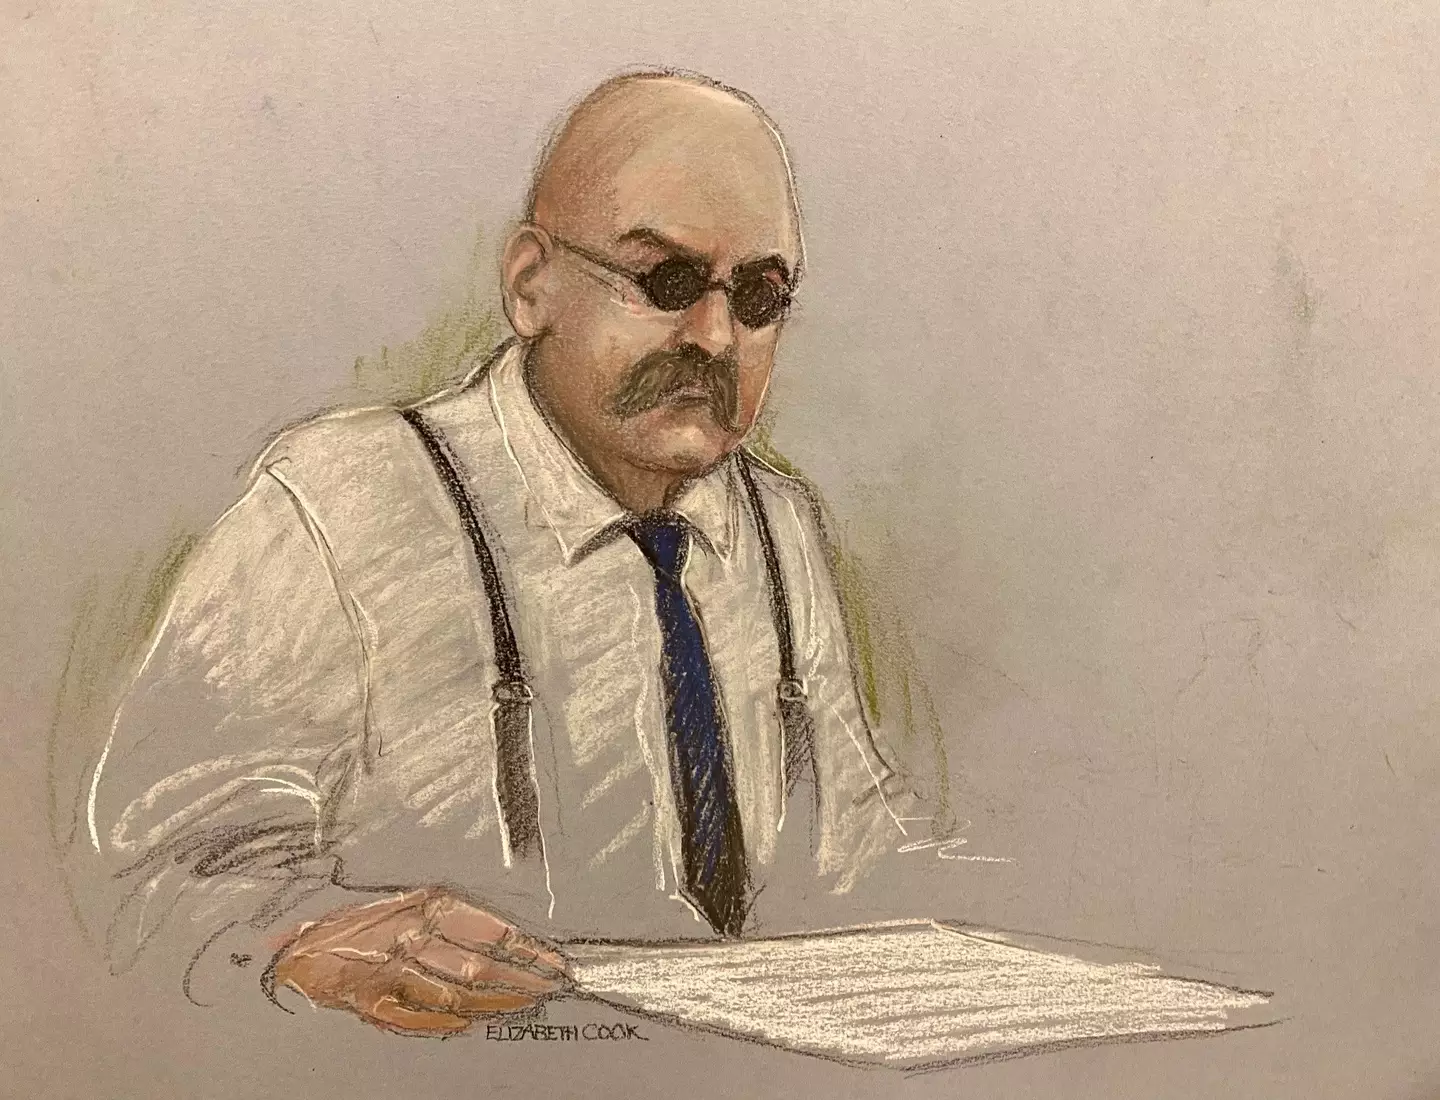 Charles Bronson appeared via video link at the hearing.